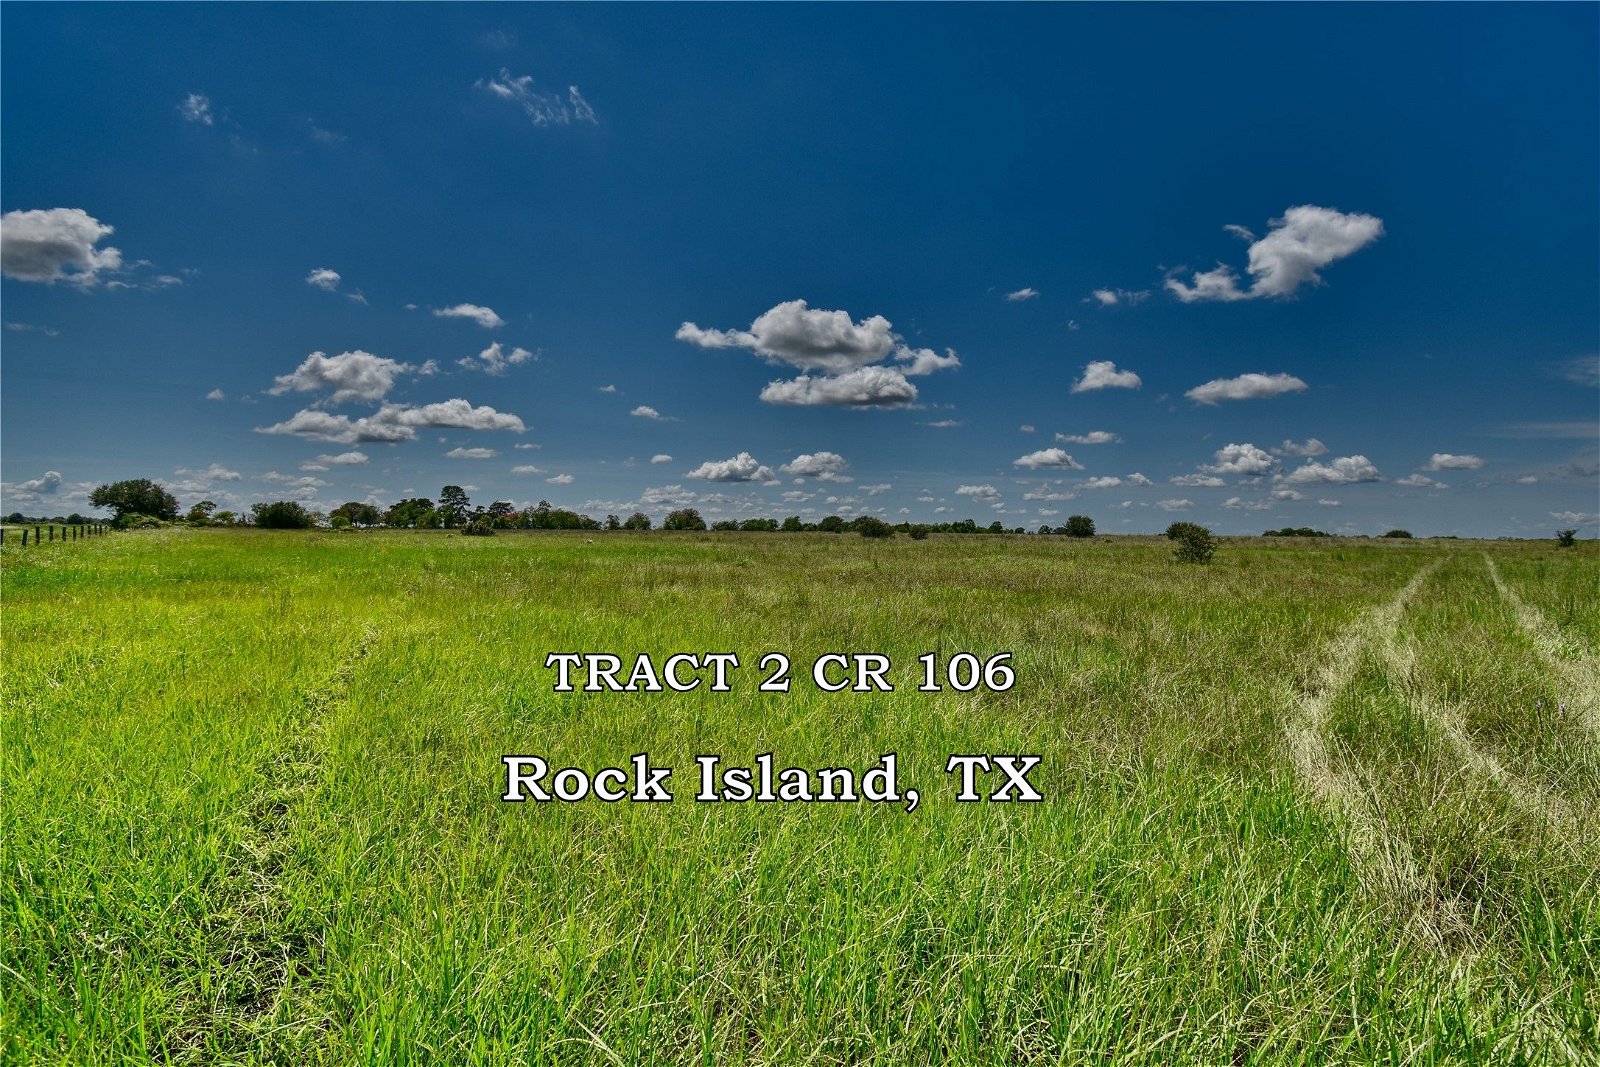 Real estate property located at TBD Tract 2 County Road 106, Colorado, 0000, Rock Island, TX, US